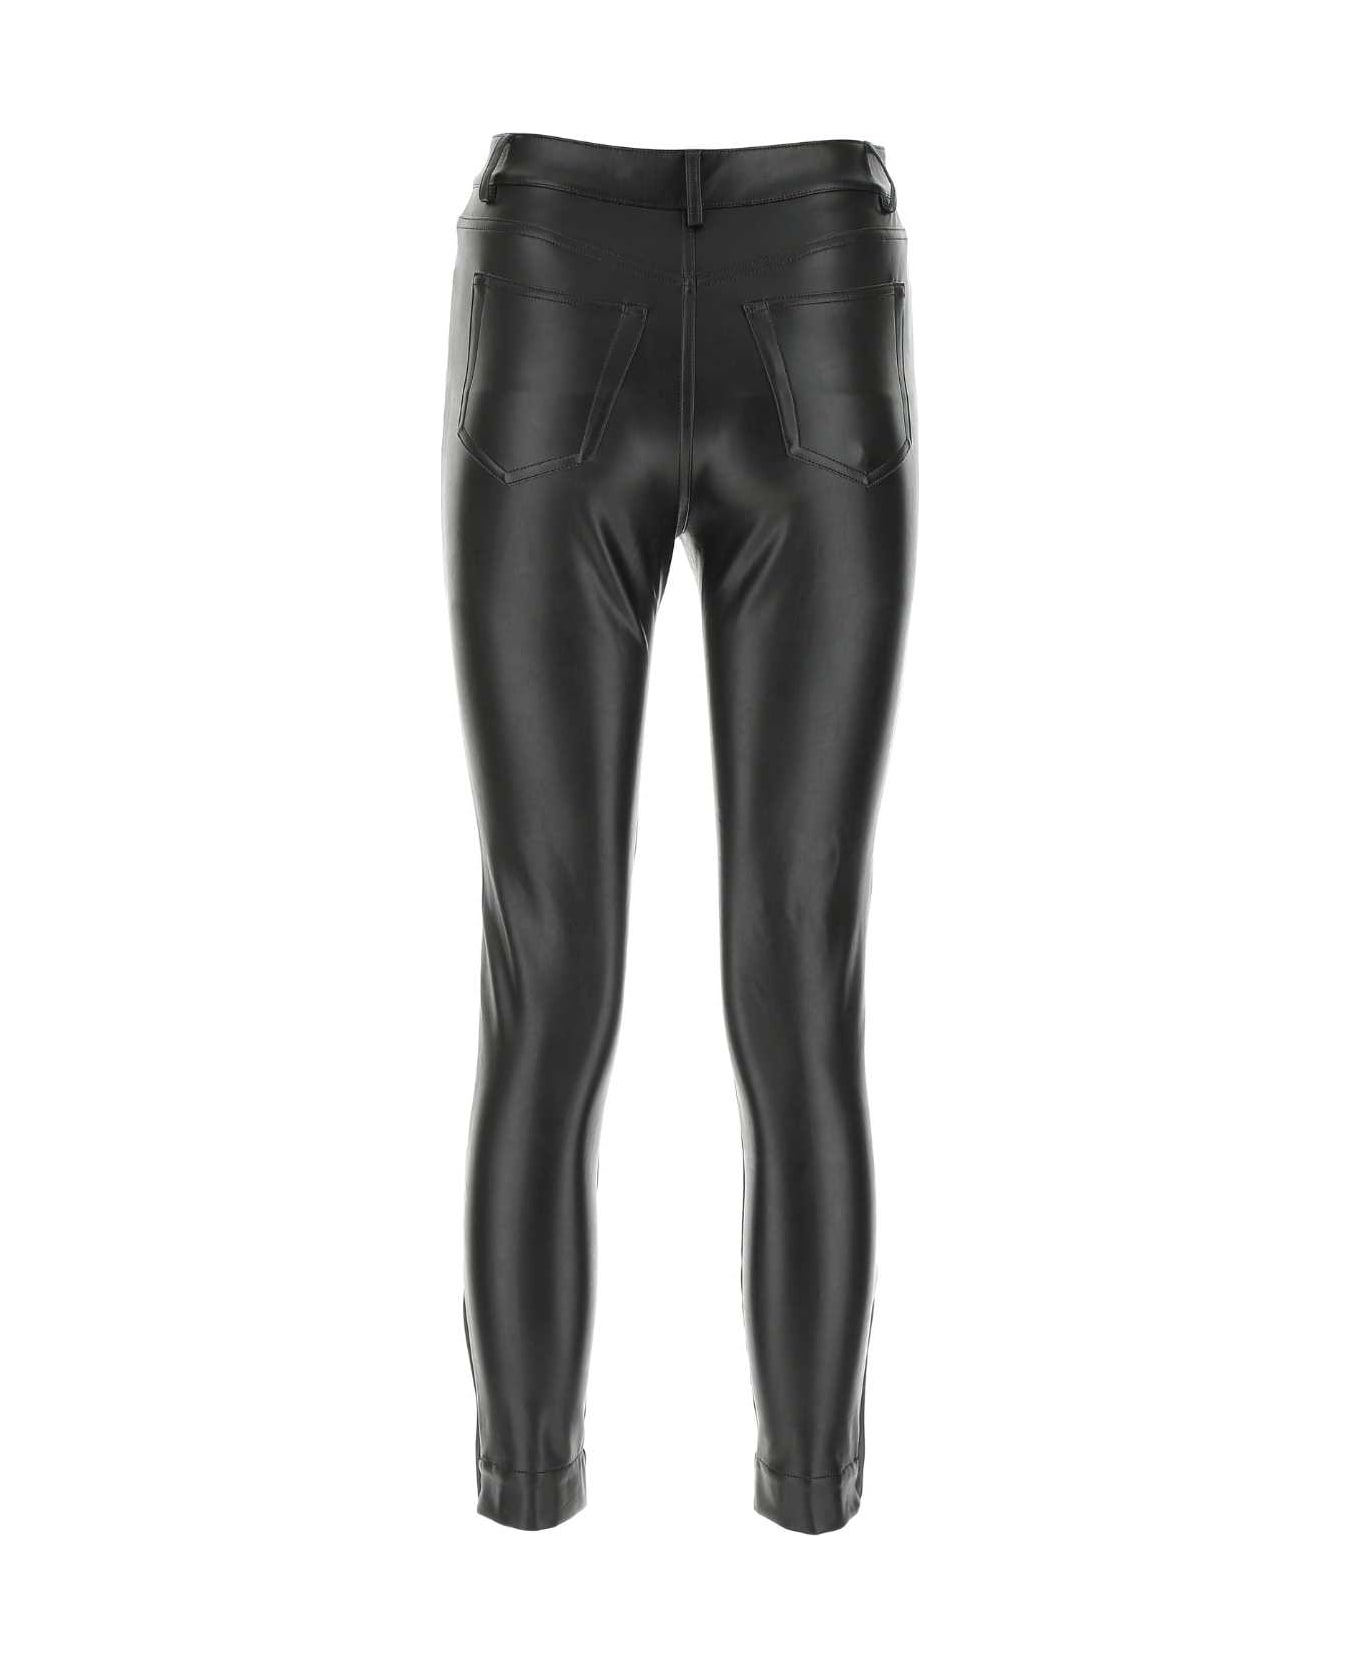 Michael Kors Black Synthetic Leather Pant - BLACK ボトムス